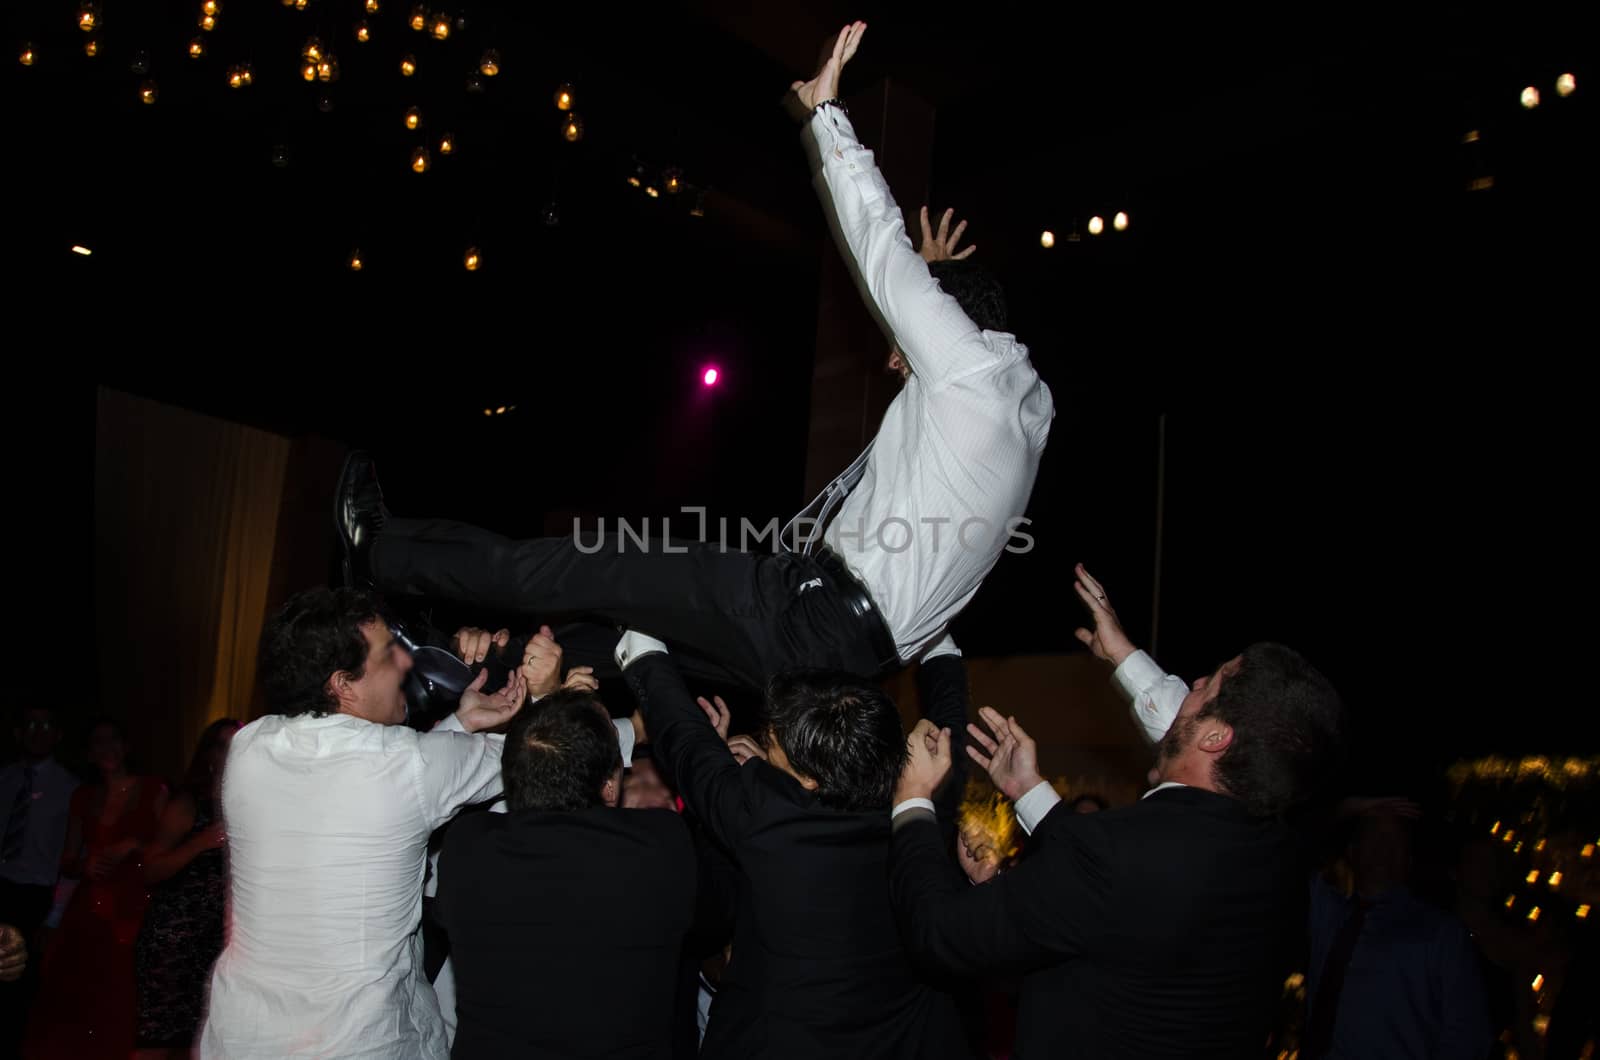 Groom in the air by Peruphotoart